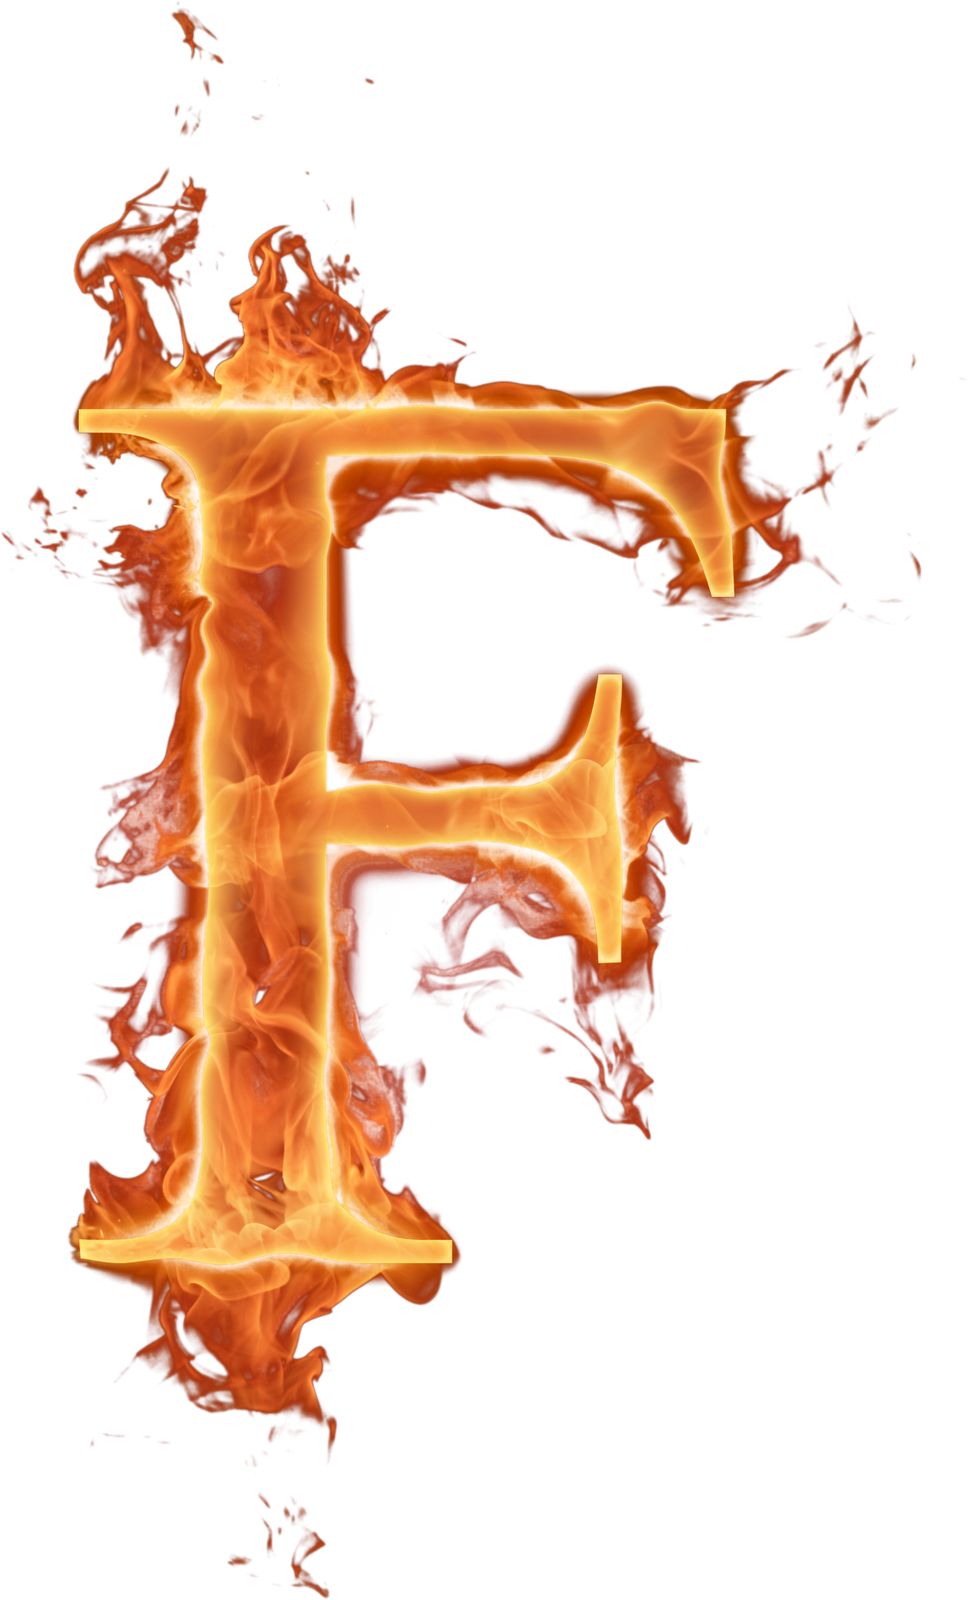 A Letter F In Flames